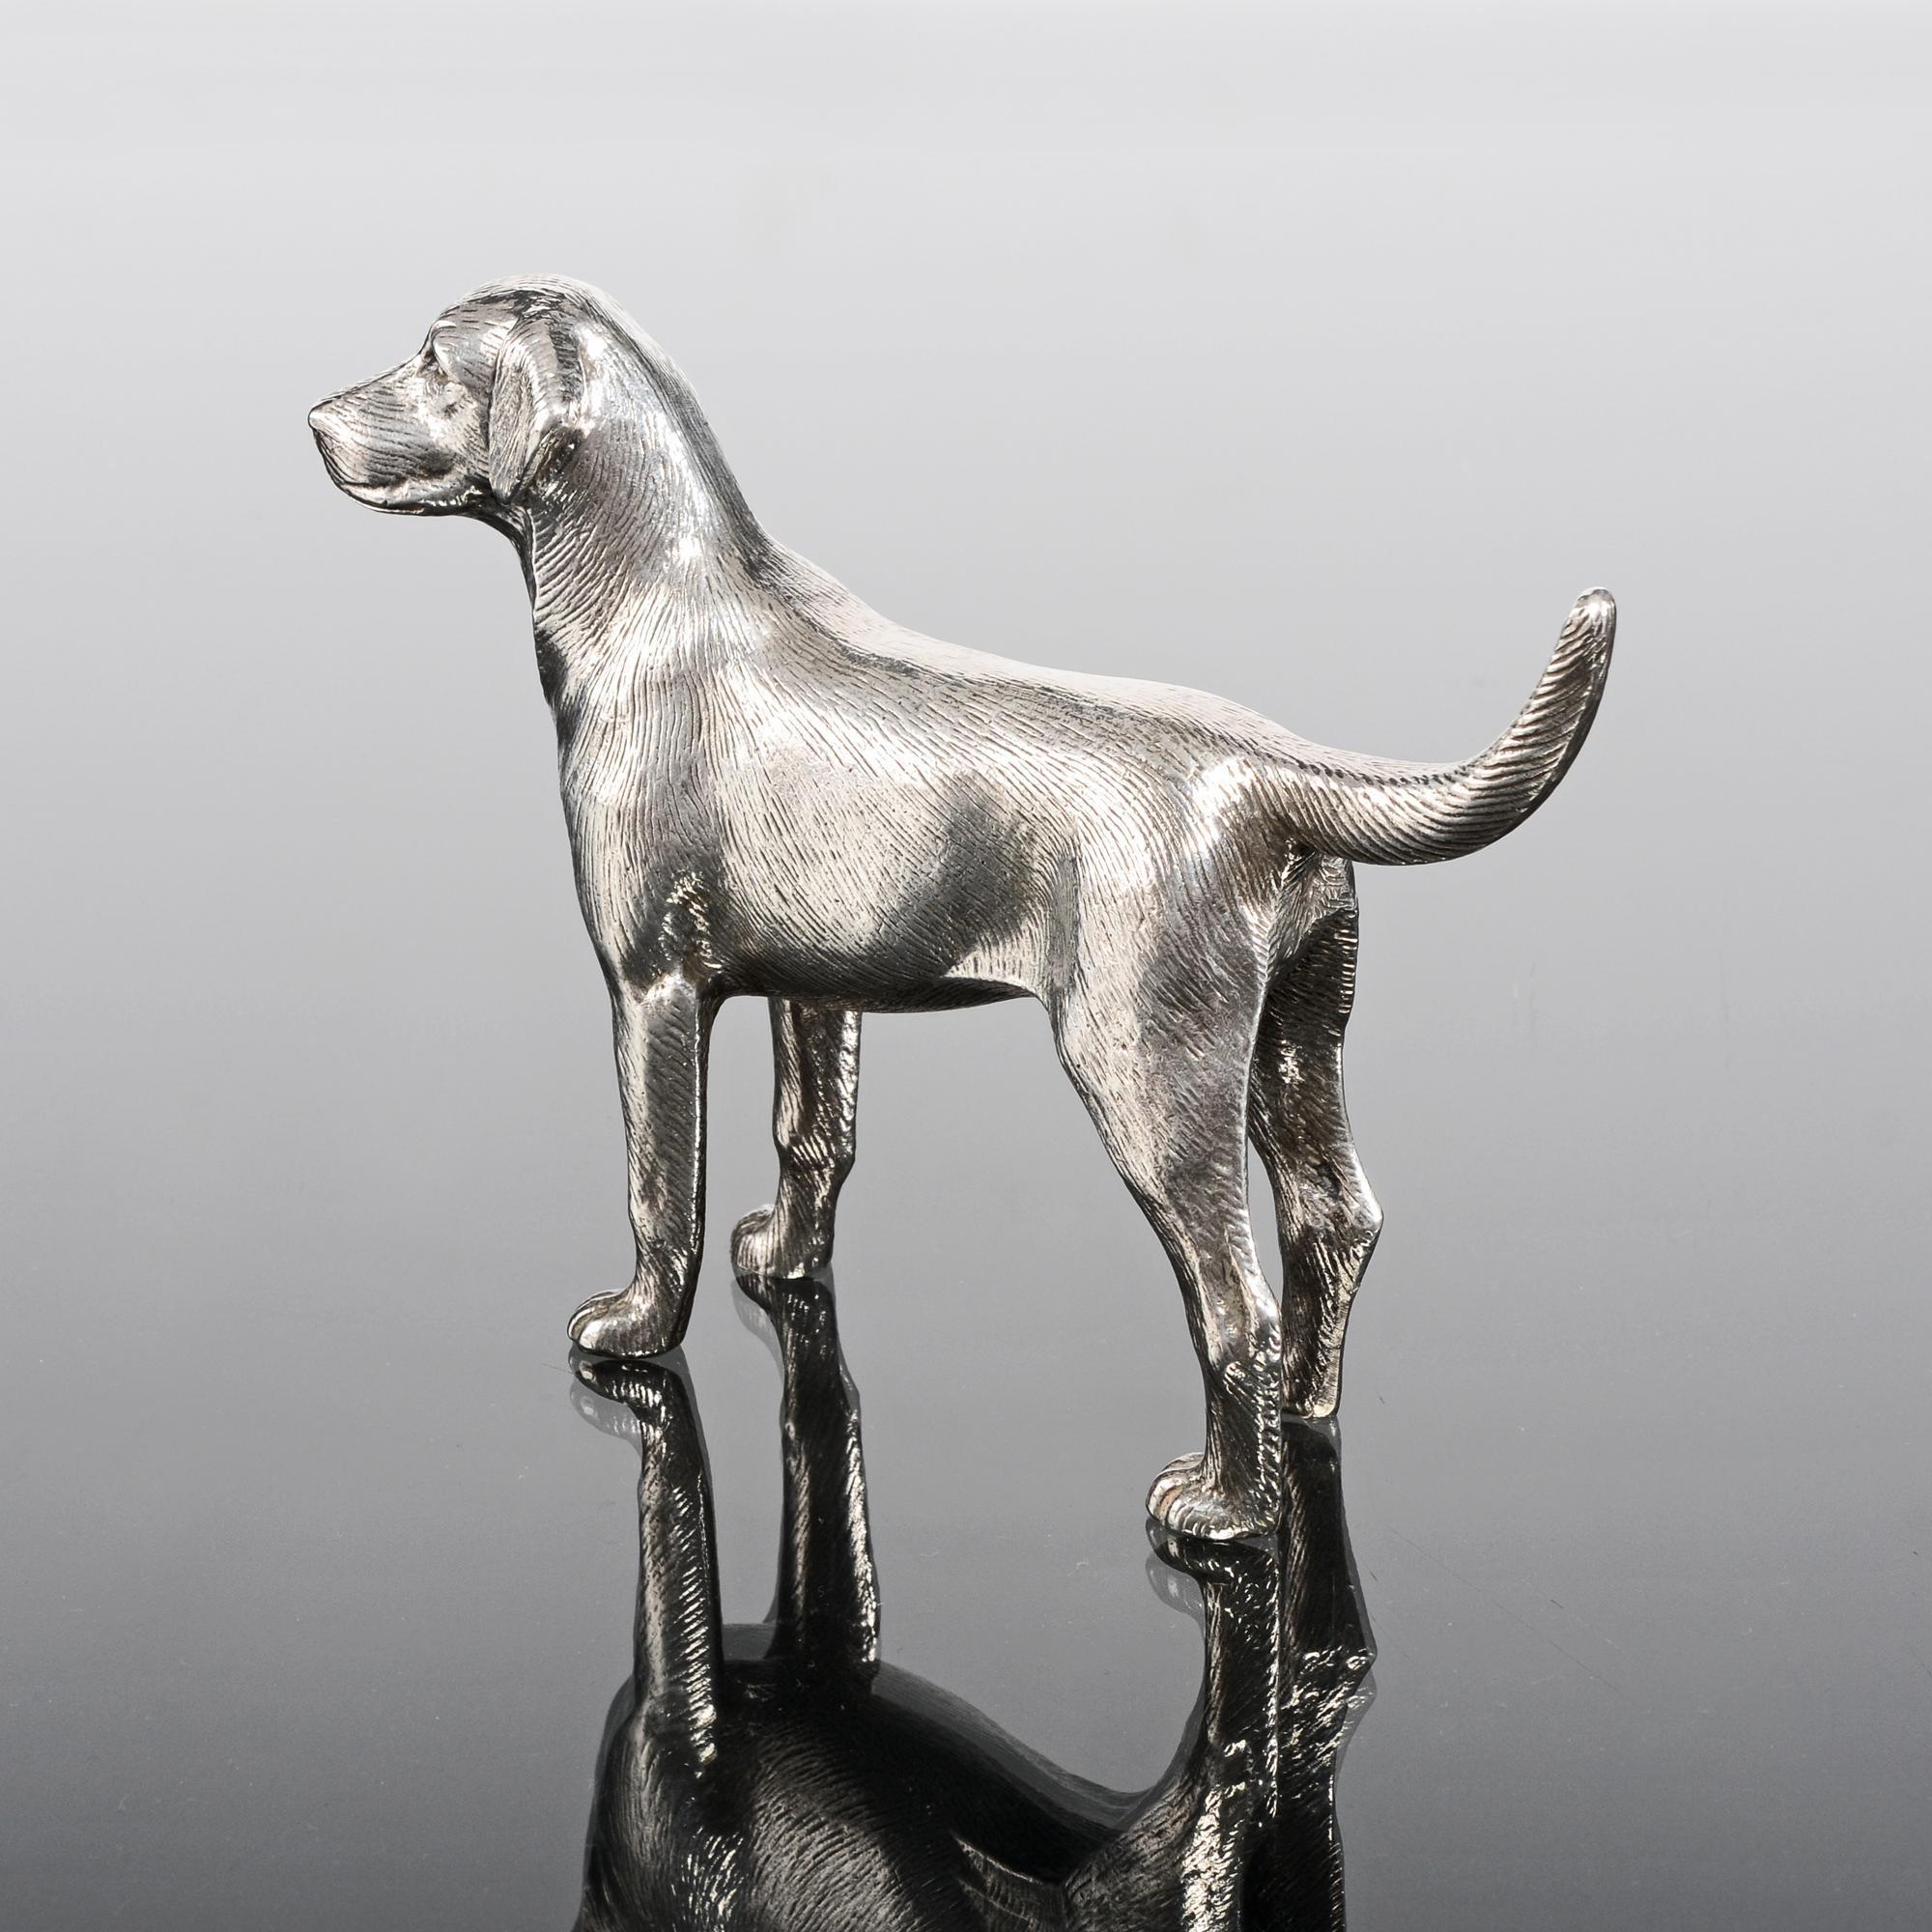 This heavy quality model of a labrador dog is cast in sterling silver and hand chased to create a lively, lifelike appearance.

Additional information:
Weight: 13 troy oz (410g)
Year: 1978
Place: Birmingham
